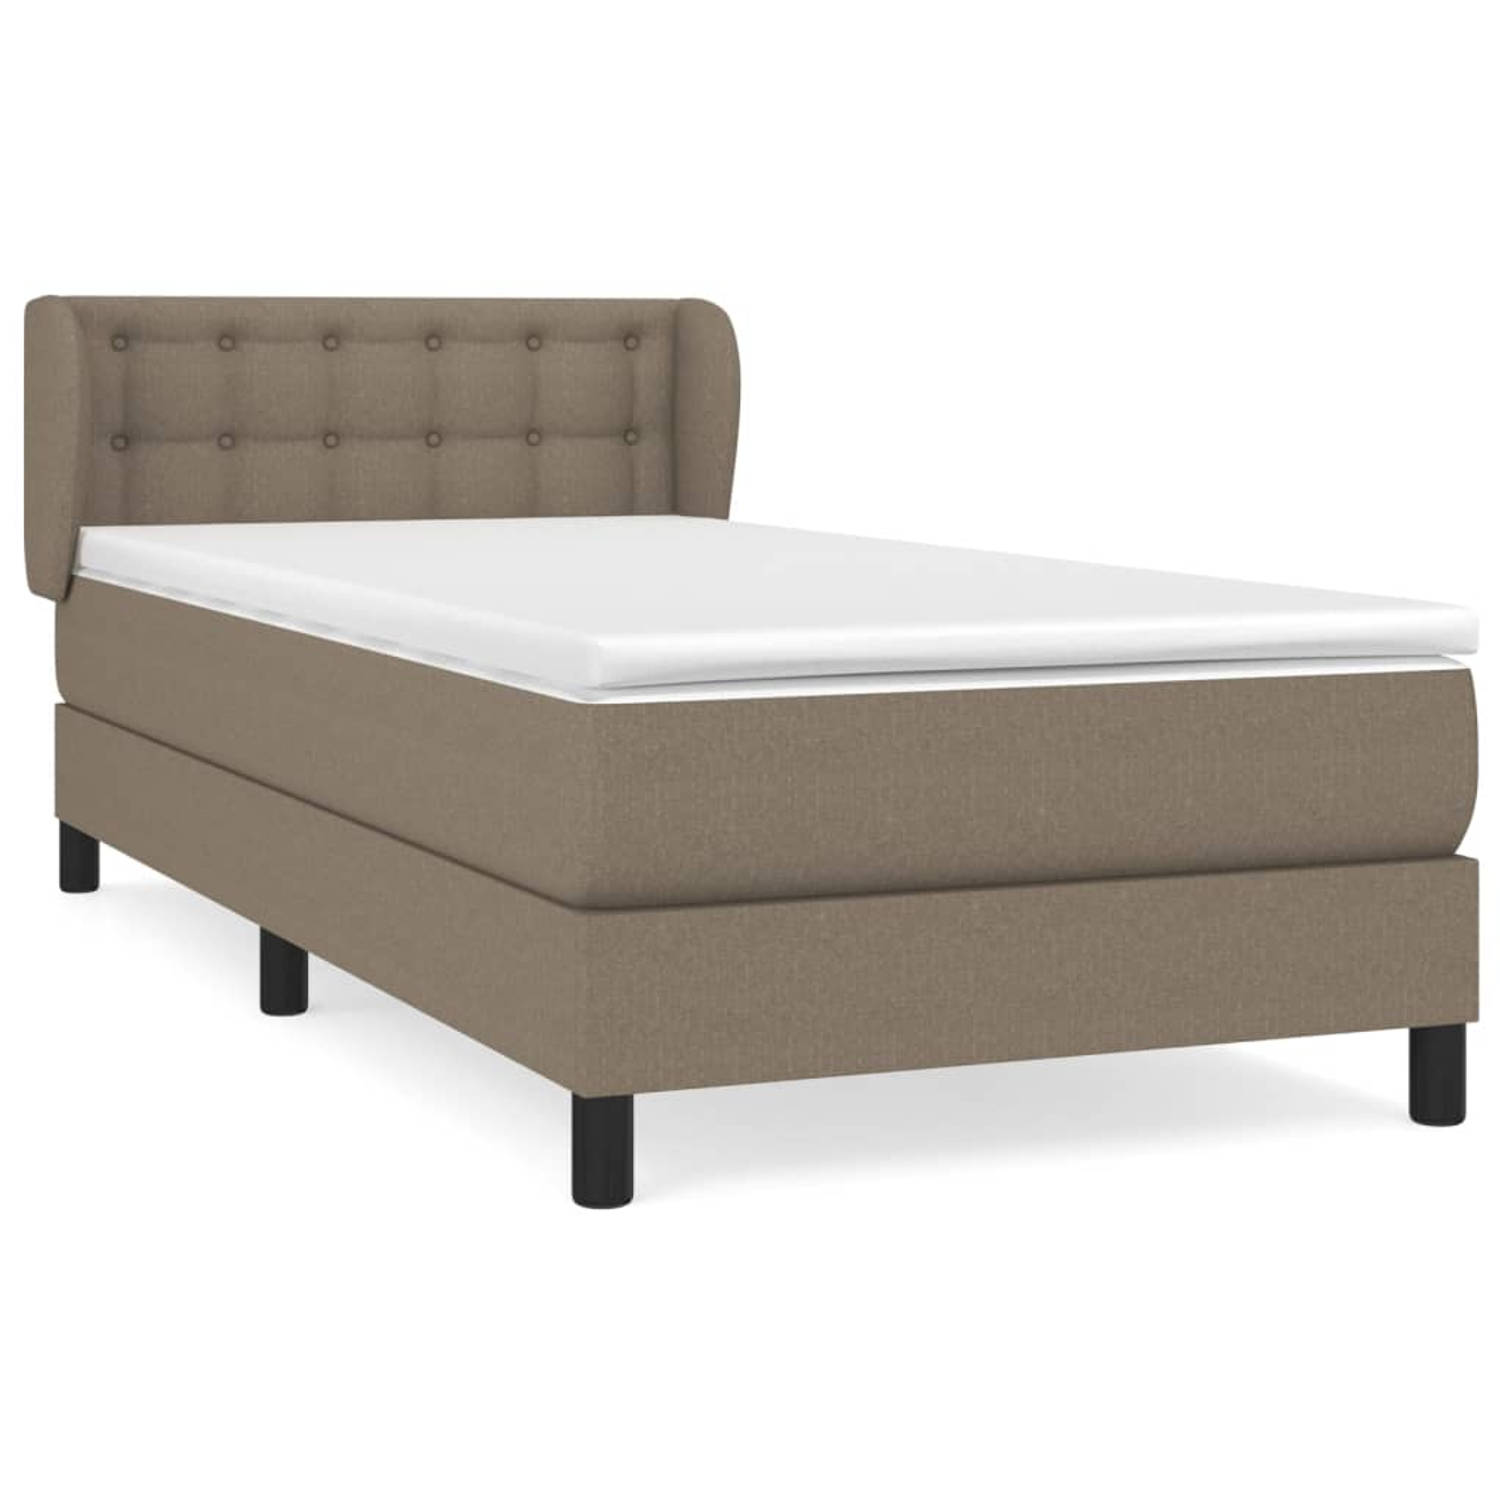 The Living Store Boxspring met matras stof taupe 90x200 cm - Boxspring - Boxsprings - Bed - Slaapmeubel - Boxspringbed - Boxspring Bed - Tweepersoonsbed - Bed Met Matras - Bedframe